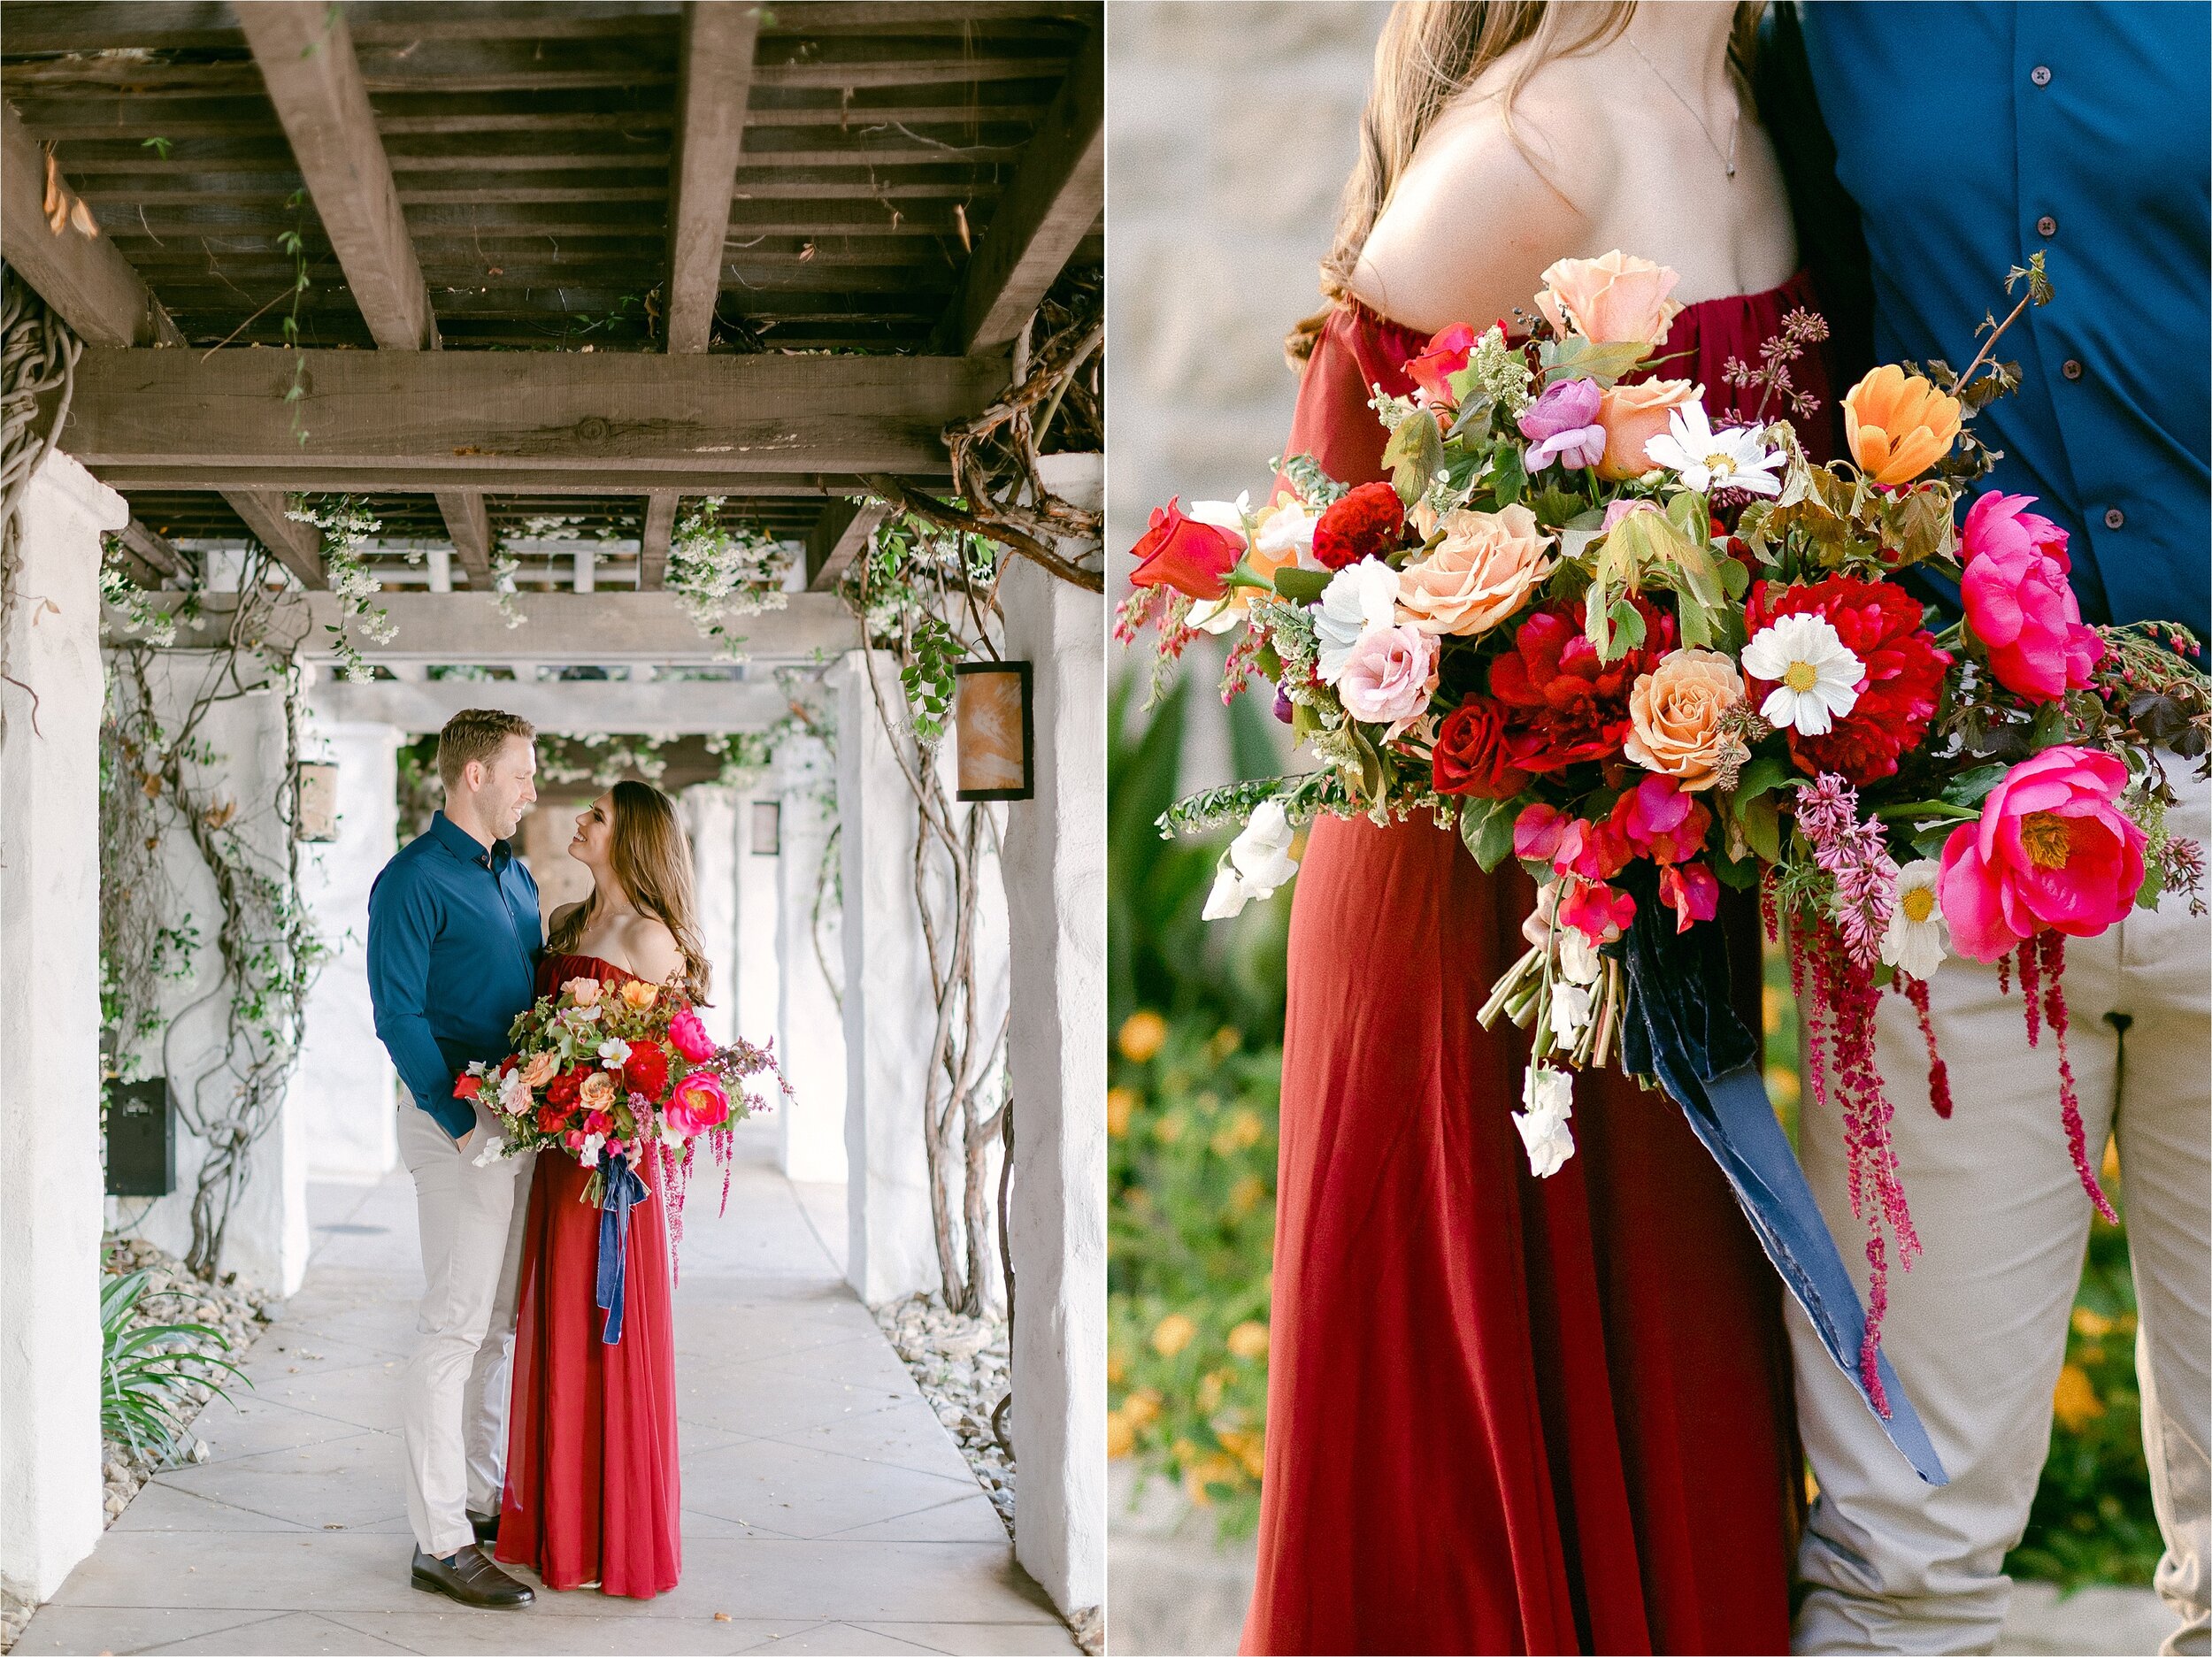 Vibrant spring bouquet held by a brunette woman in a wine colored dress looking lovingly at her fiance, a tall male in a midnight blue button down shirt and khaki pants.